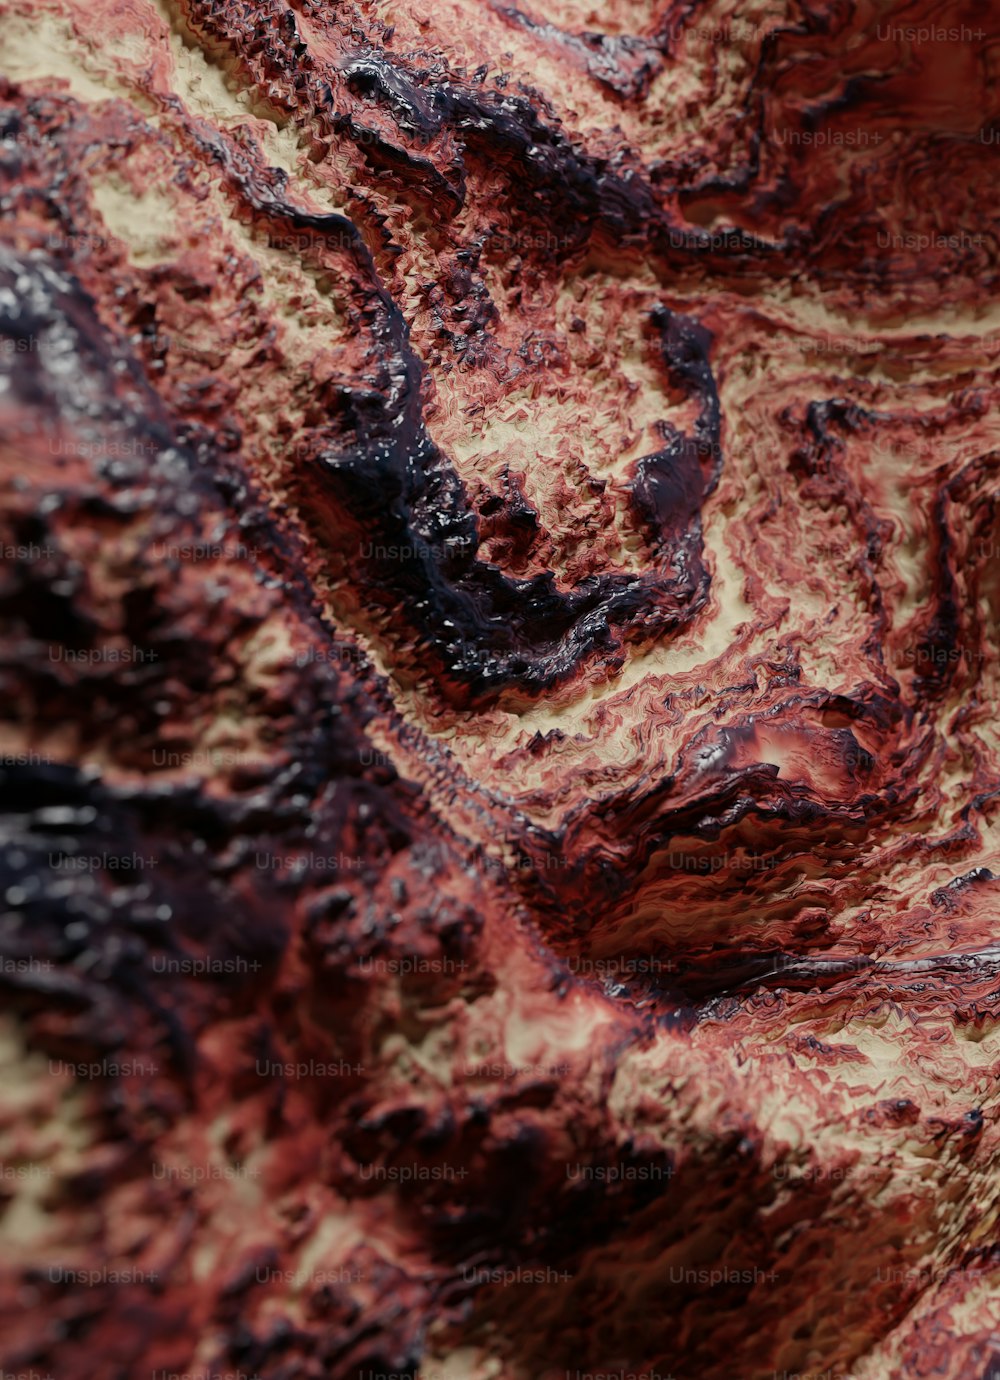 a close up of a red and black substance